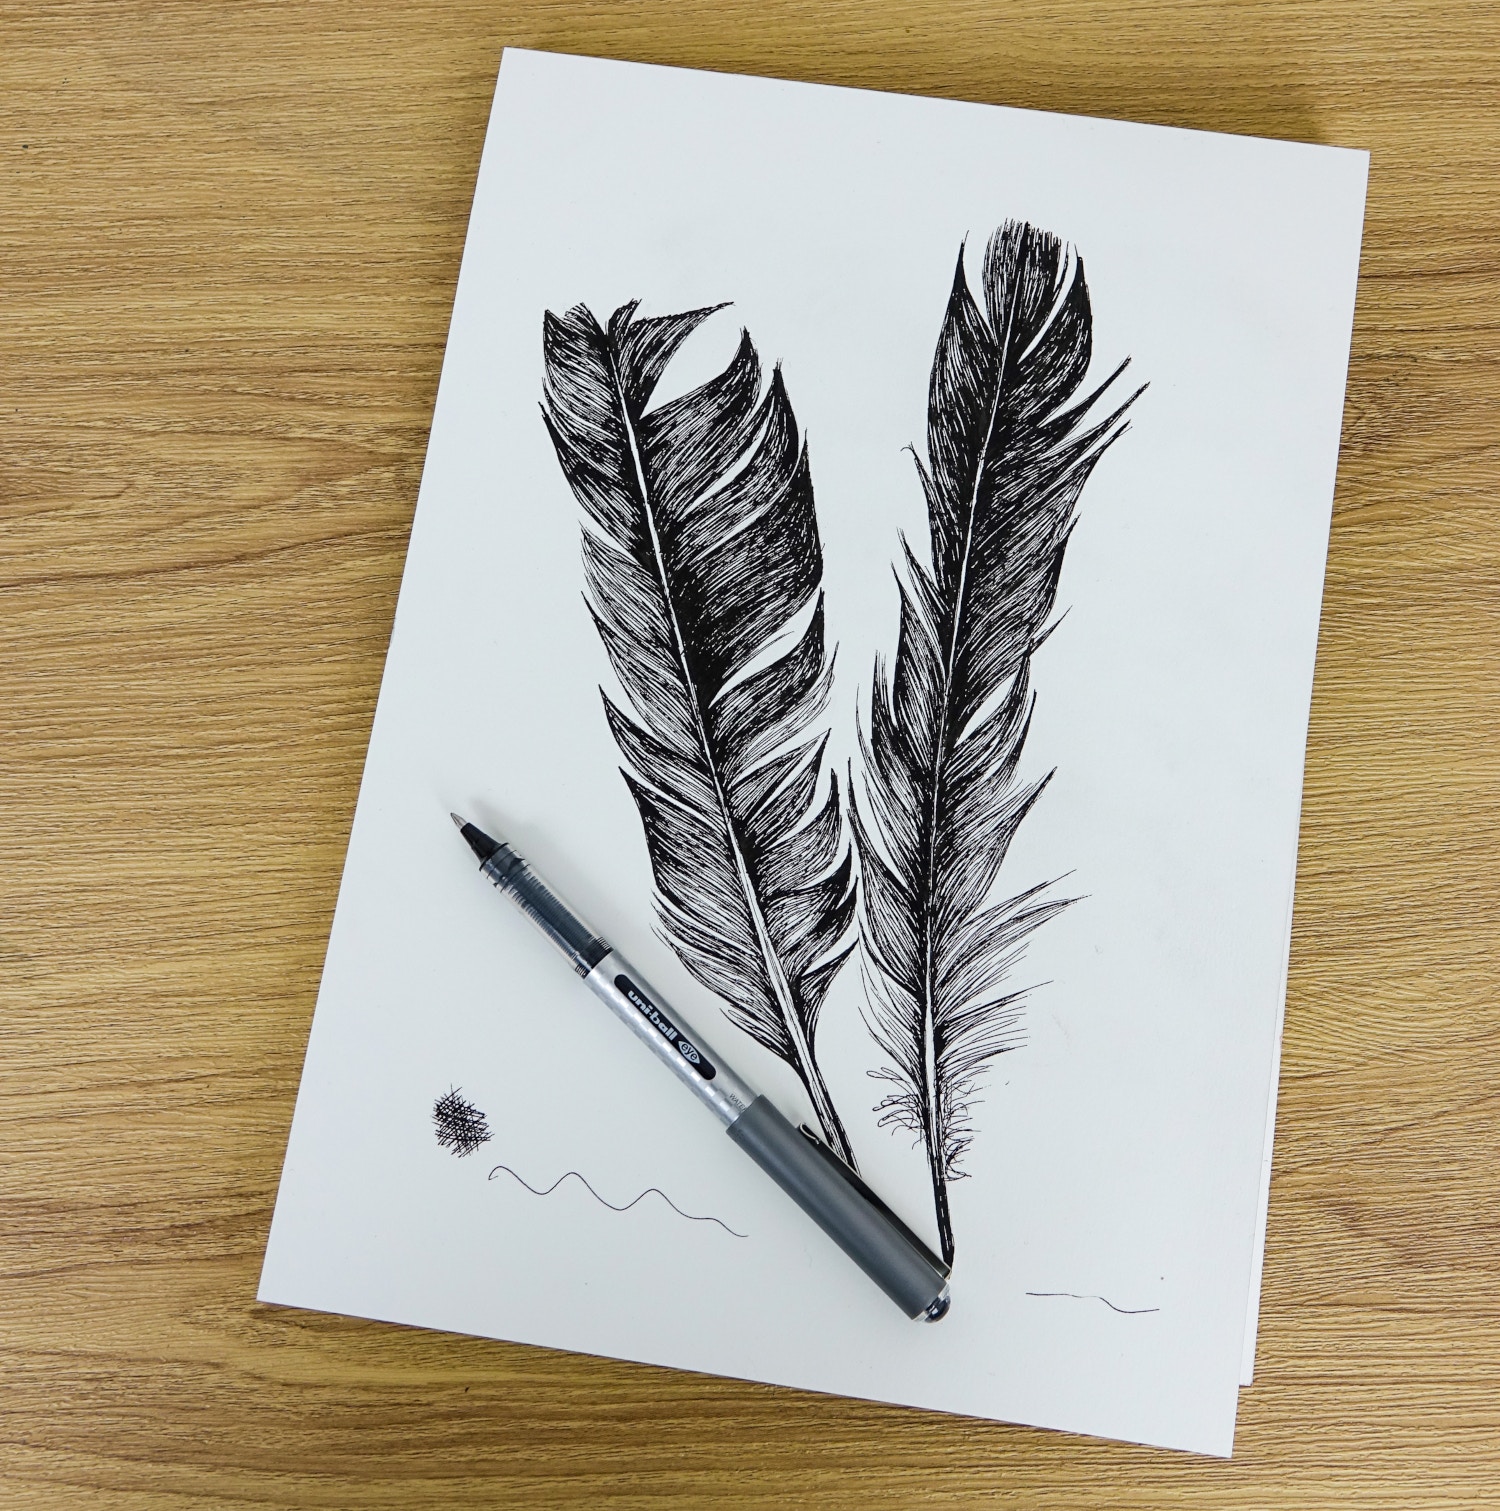 A sketch of two feathers using a Uni-ball Eye Designer pen